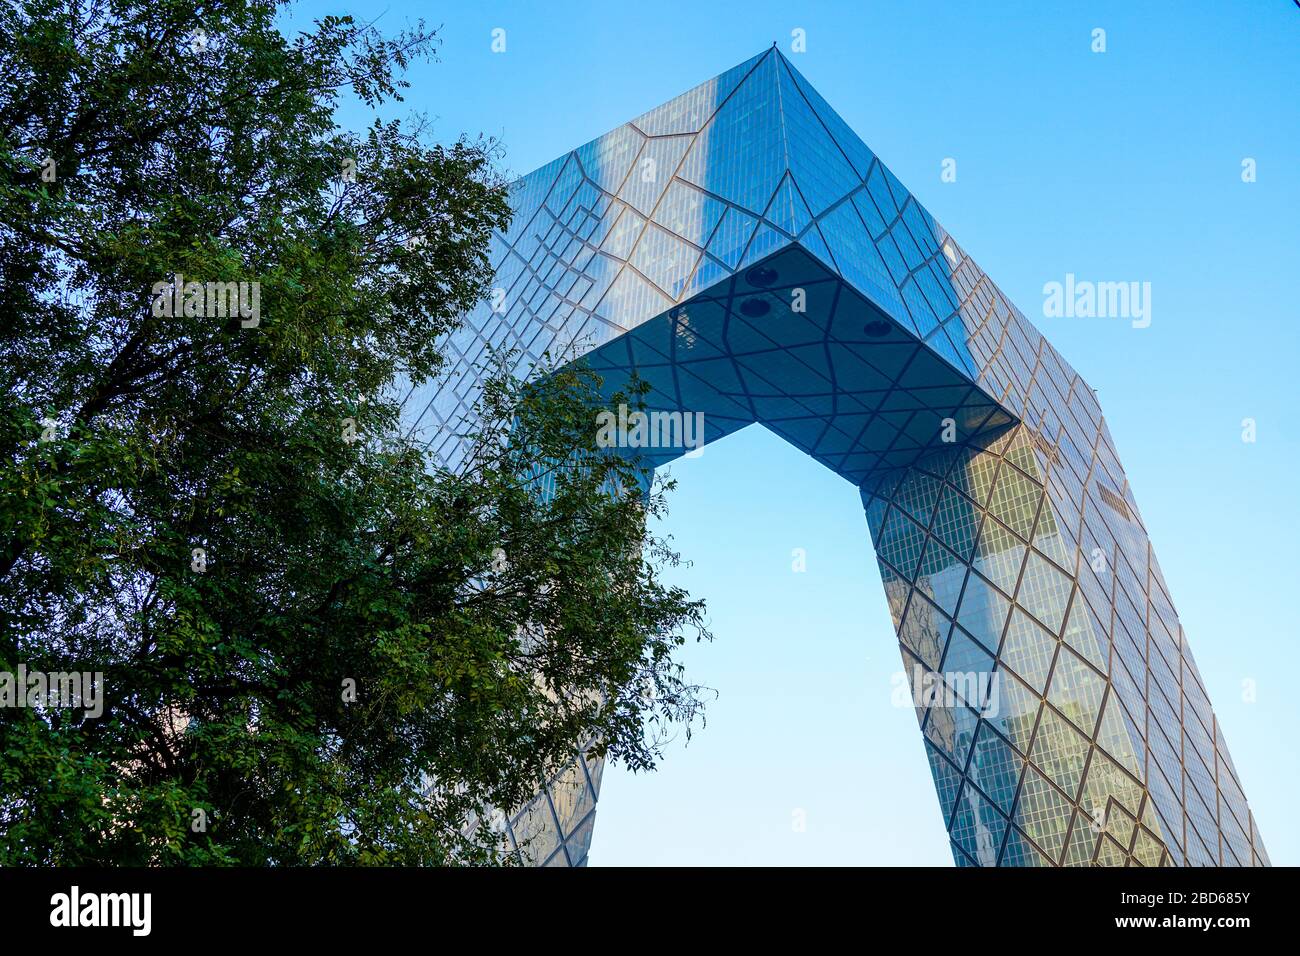 The CCTV Tower of Beijing, China. CCTV Headquarters during blue day in Beijing, The CCTV building is a loop of six horizontal and vertical sections with a total floor space of 473,000 sq. April 4th, 2020 Stock Photo